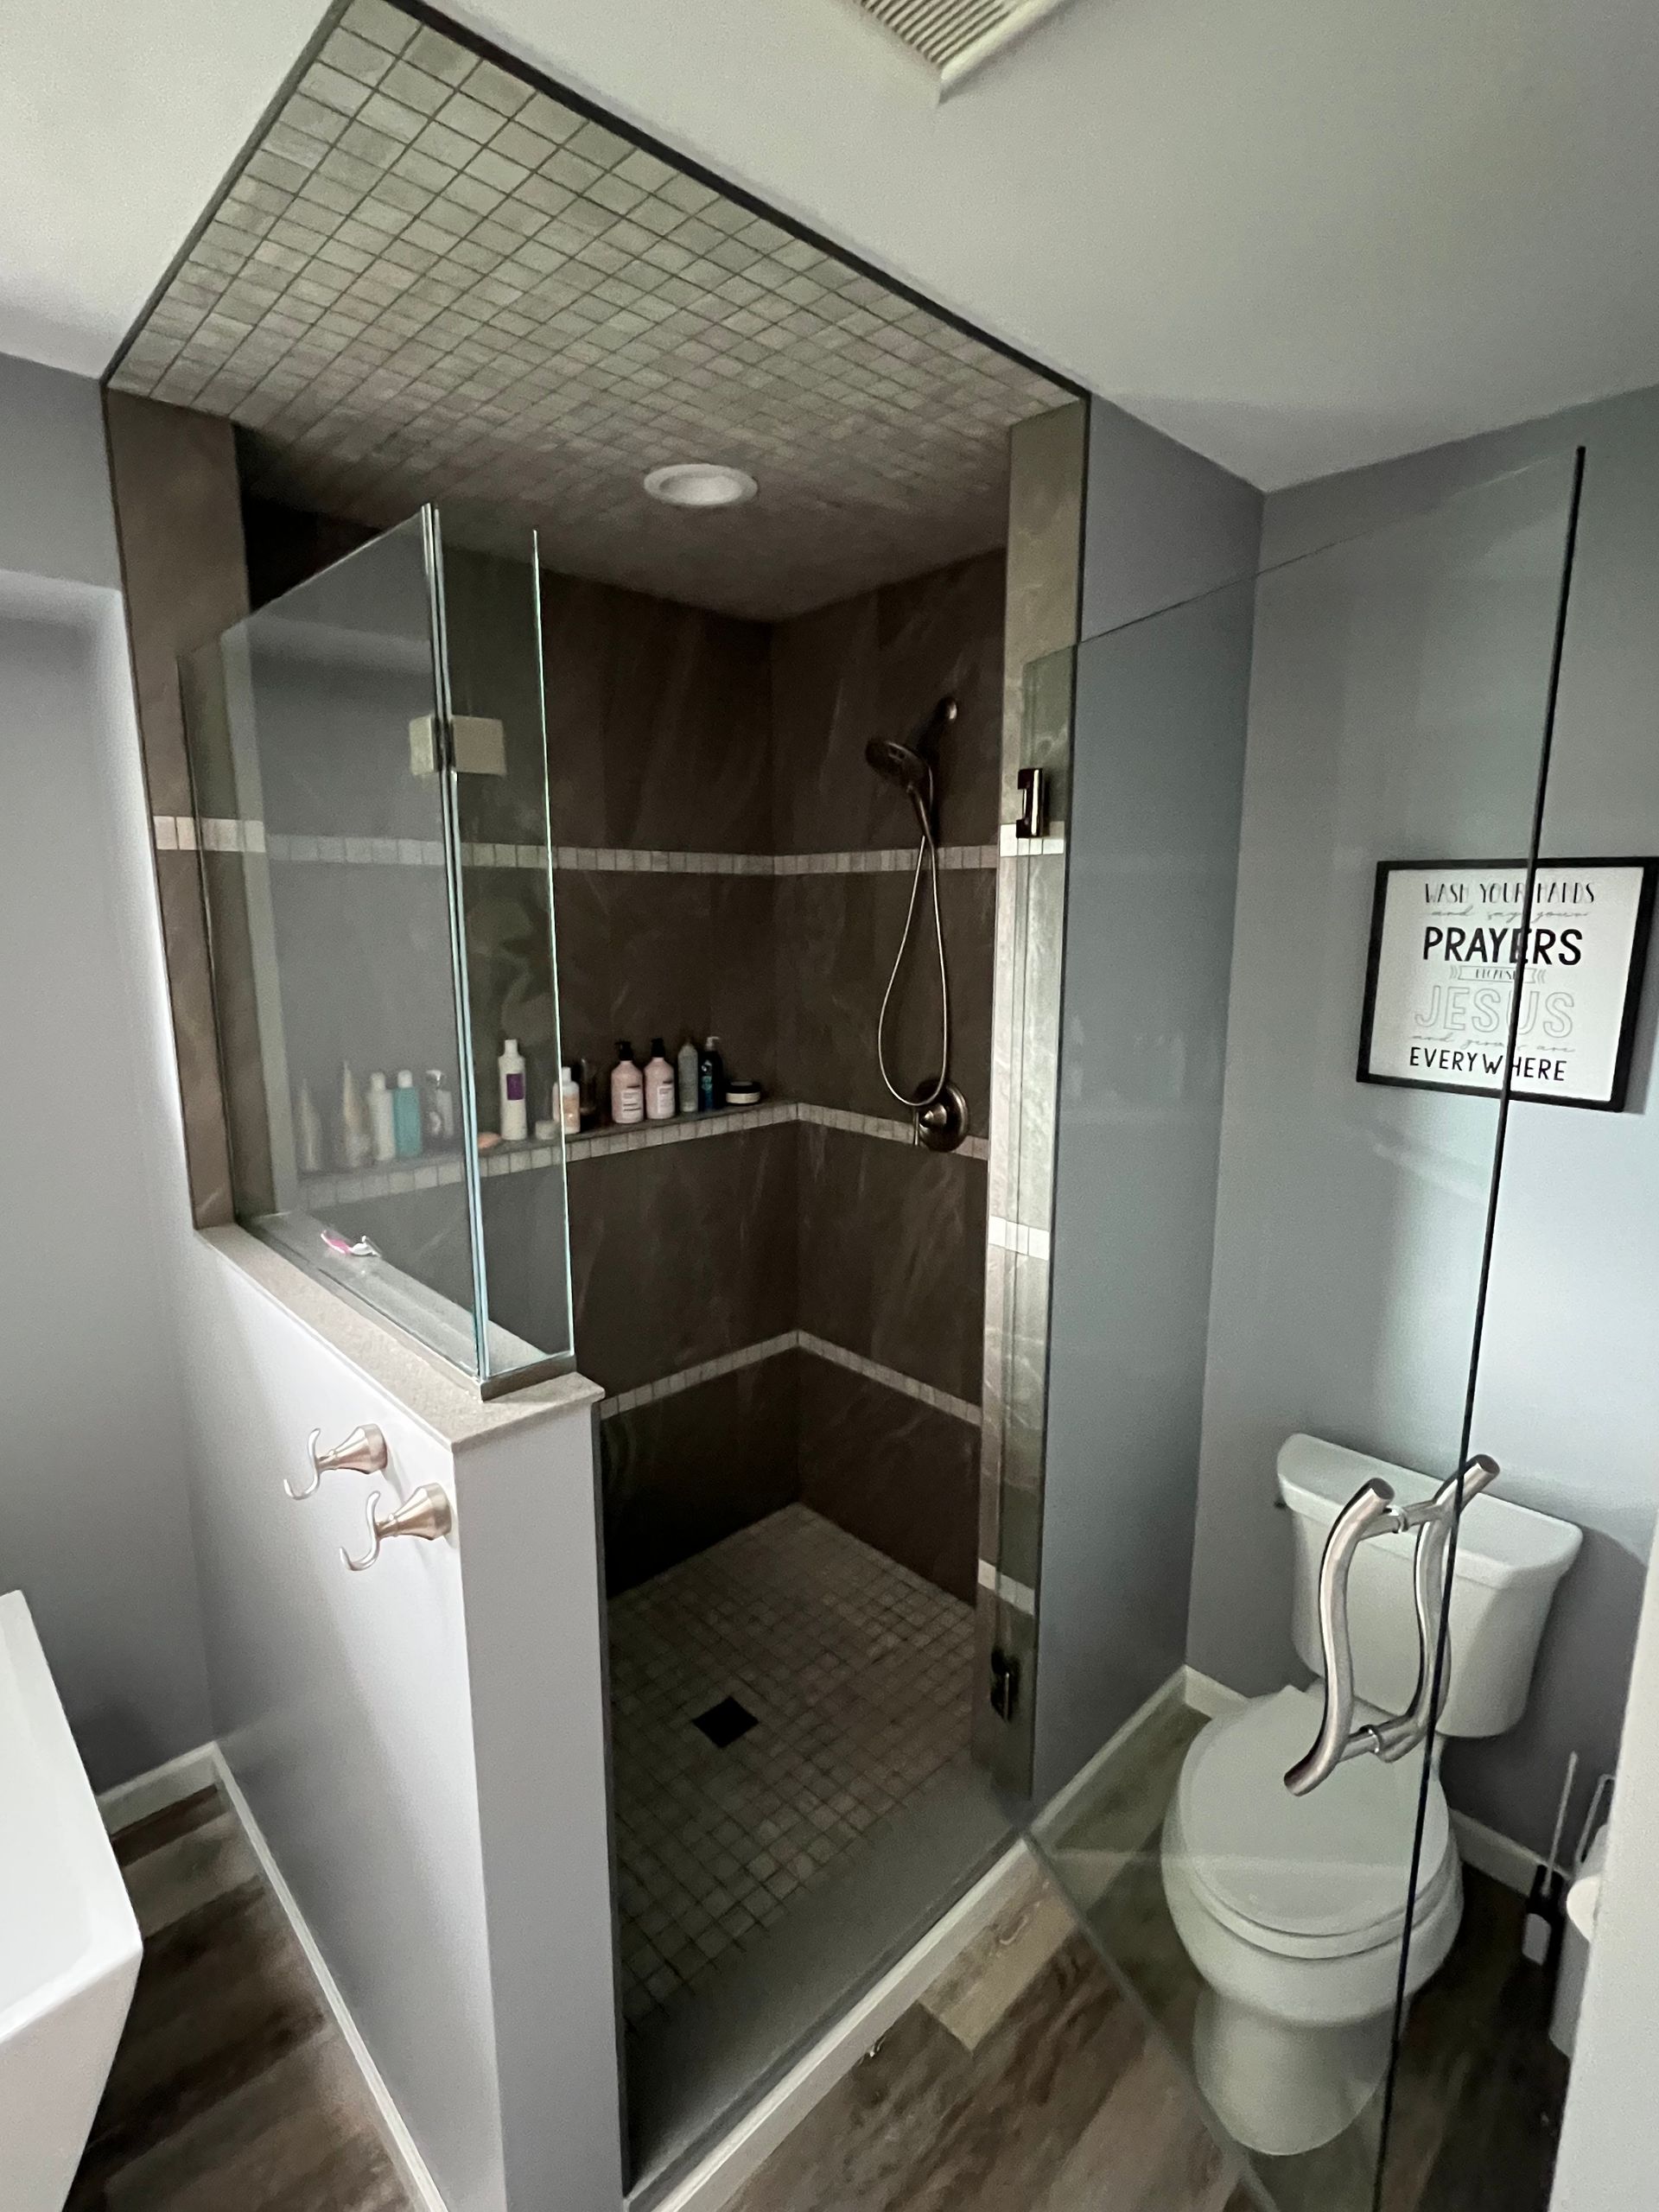 Bathroom with a glass shower